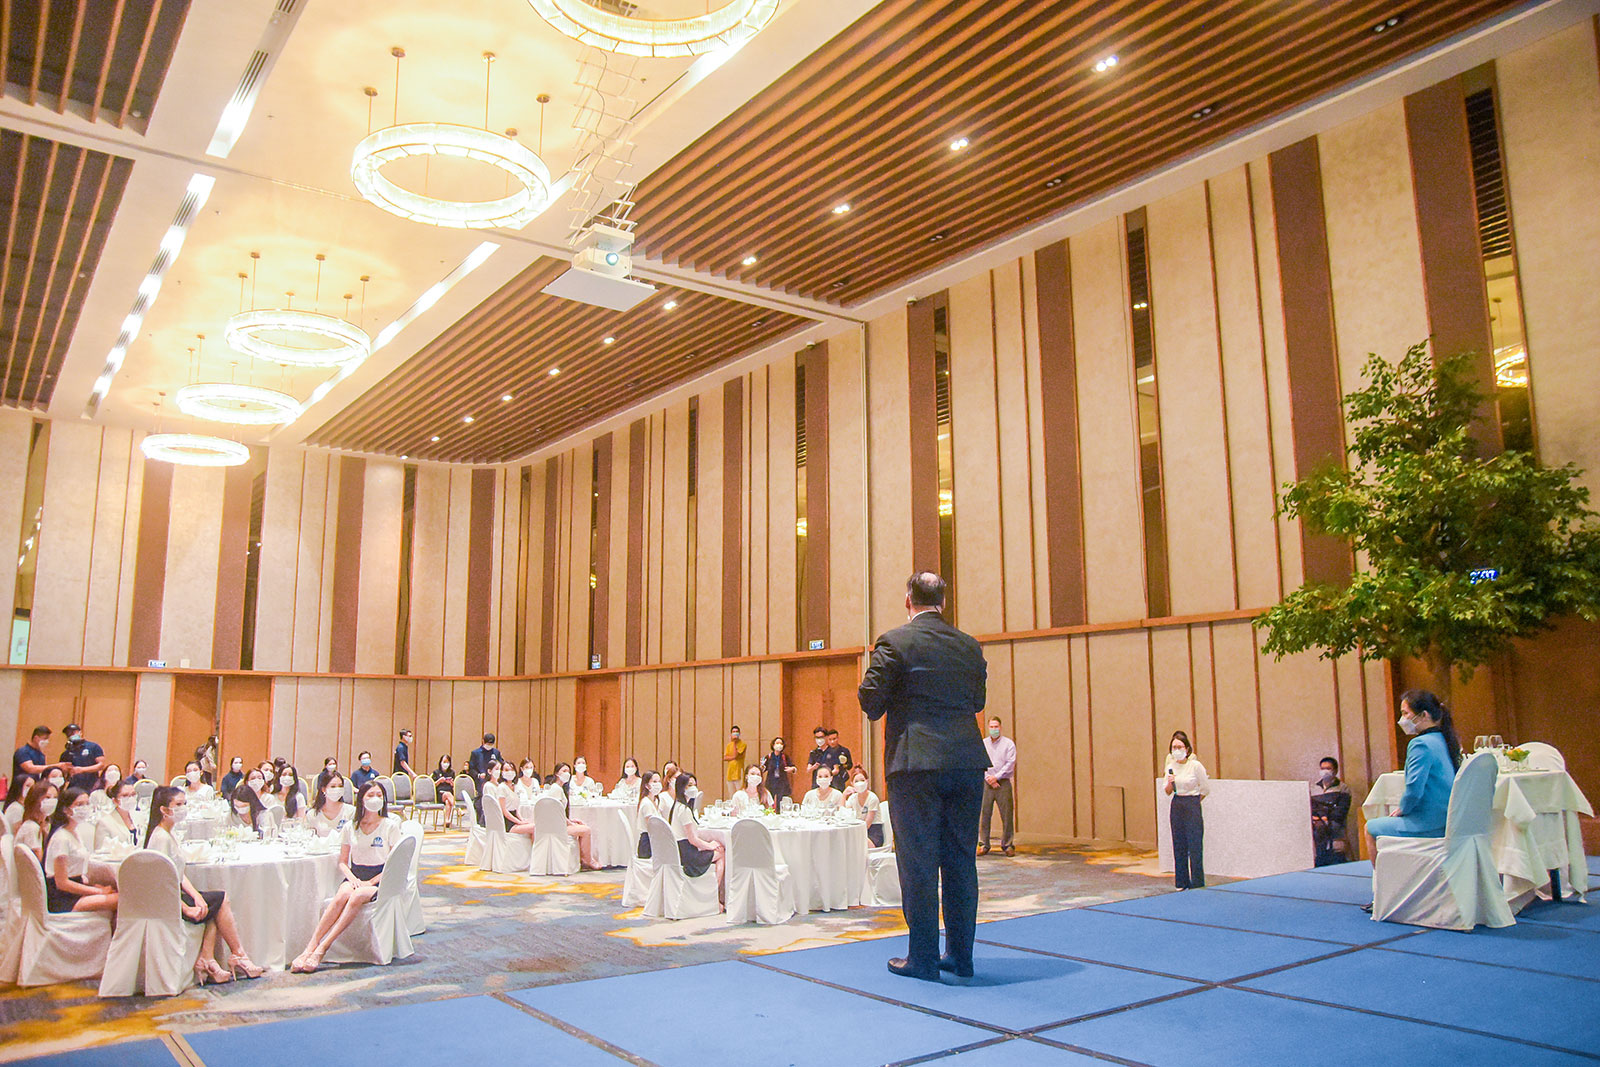 TABLE ETIQUETTE TRAINING COURSE FOR 31 CONTESTANTS MISS TOURISM DANANG 2022 AT ARIYANA CONVENTION CENTRE DANANG